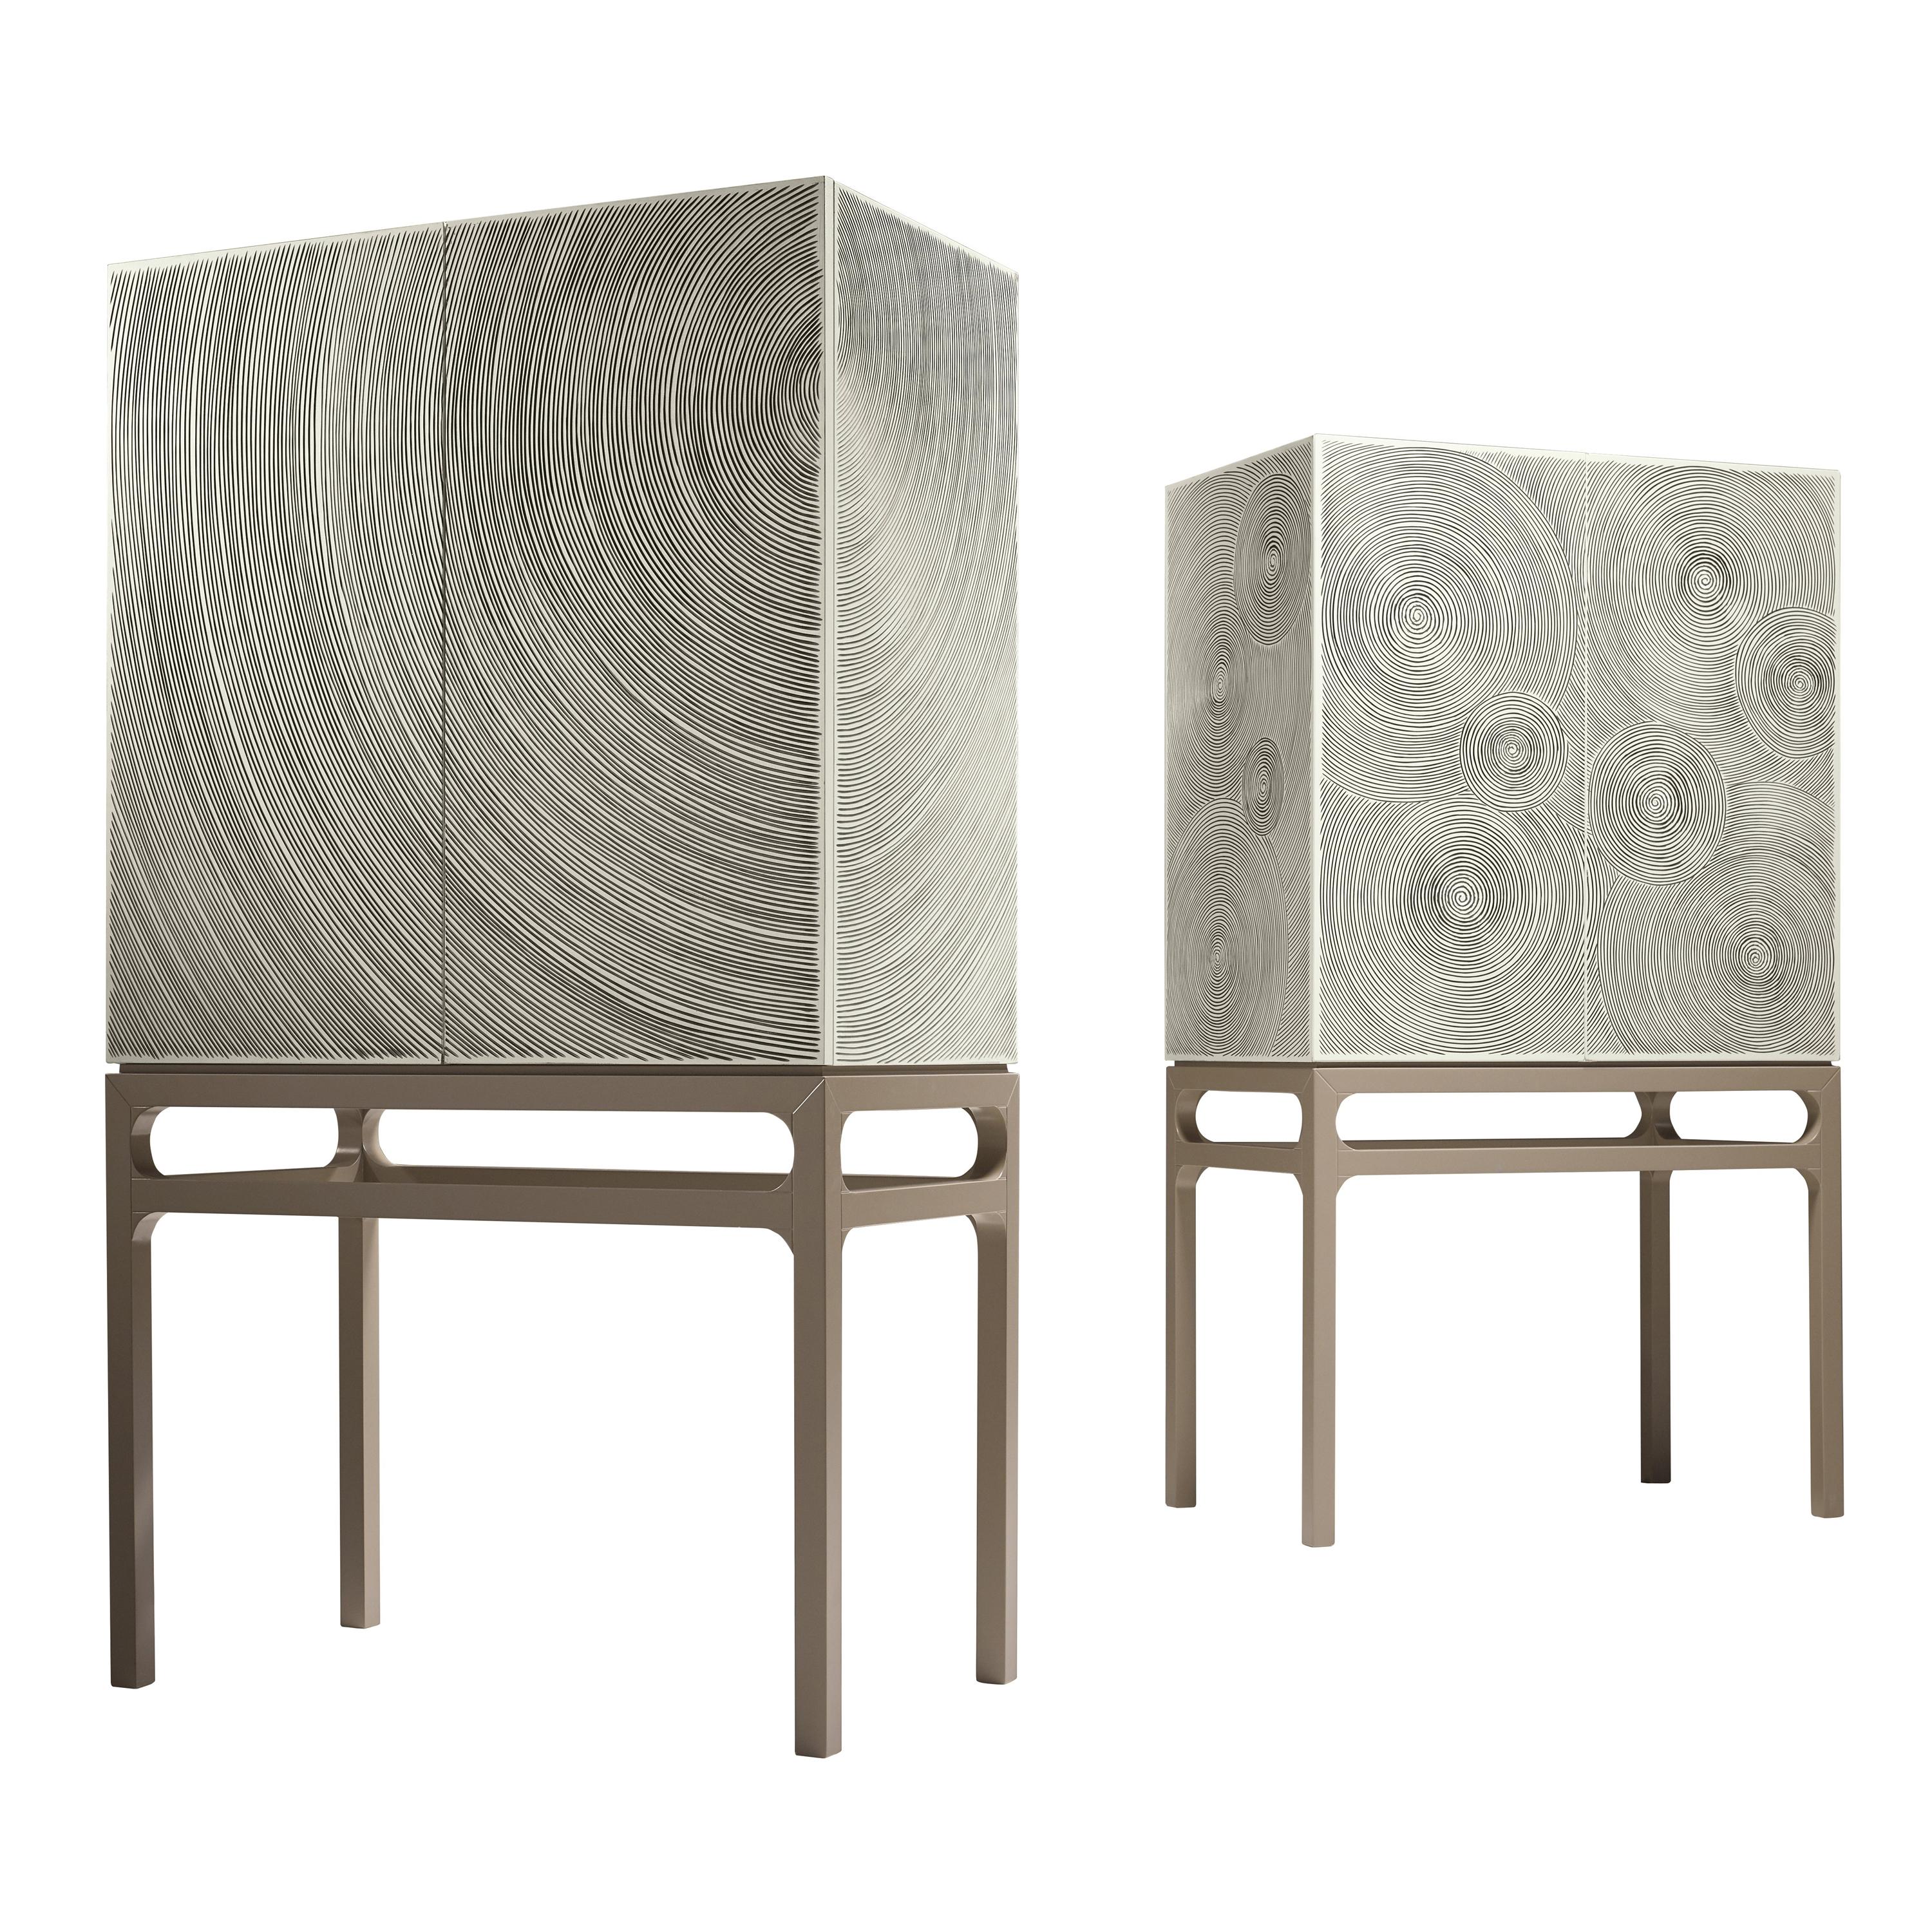 Drop Contemporary and Customizable Bar Cabinet by Luísa Peixoto